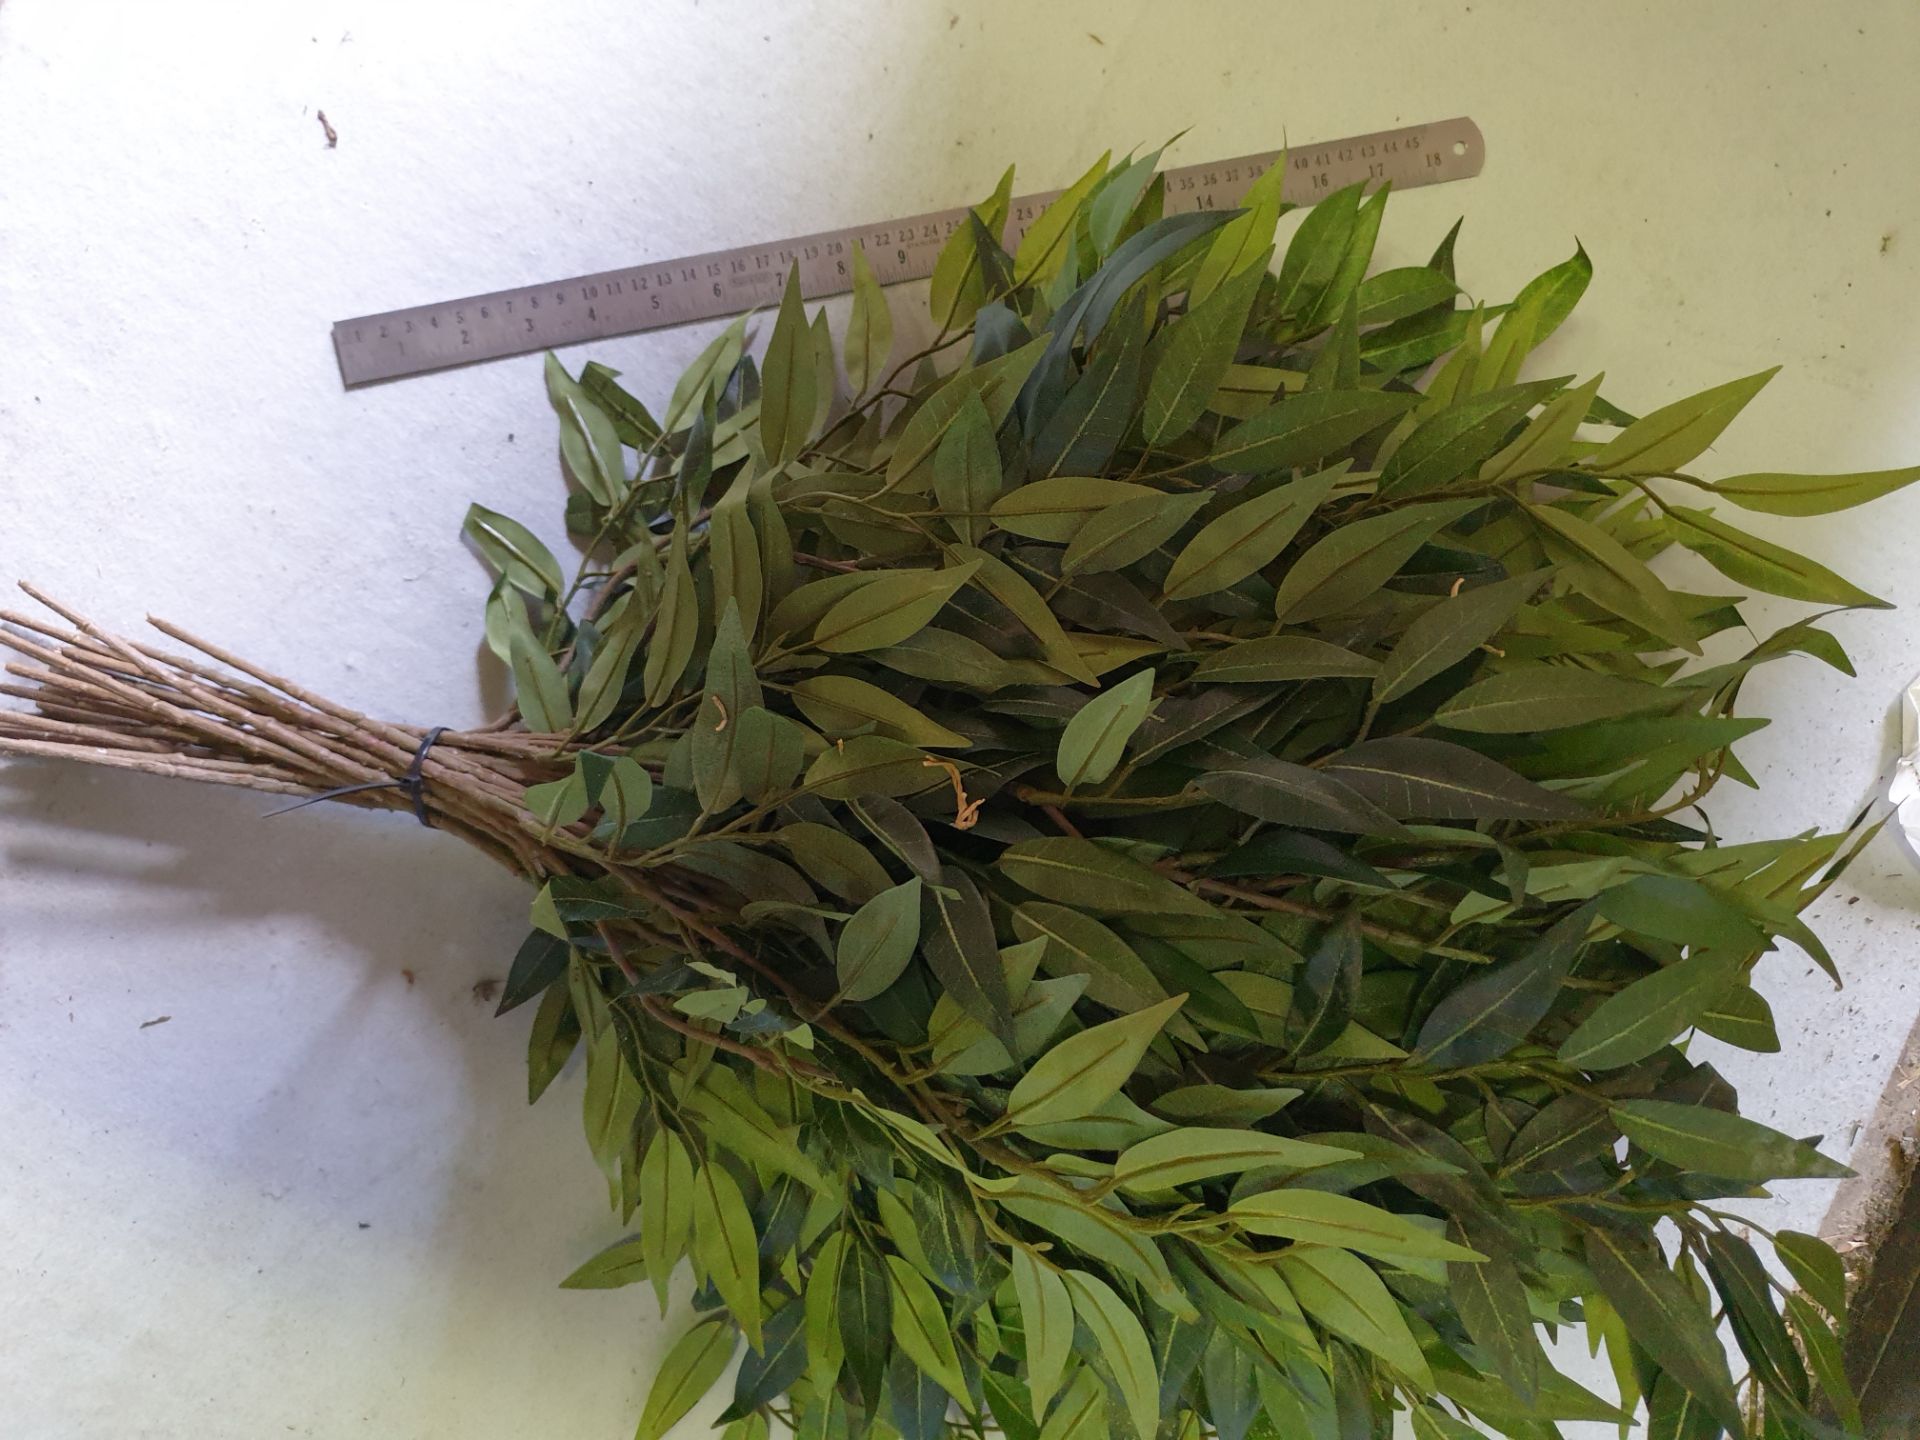 60 Pieces Artificial Smilax foliage - Image 2 of 3